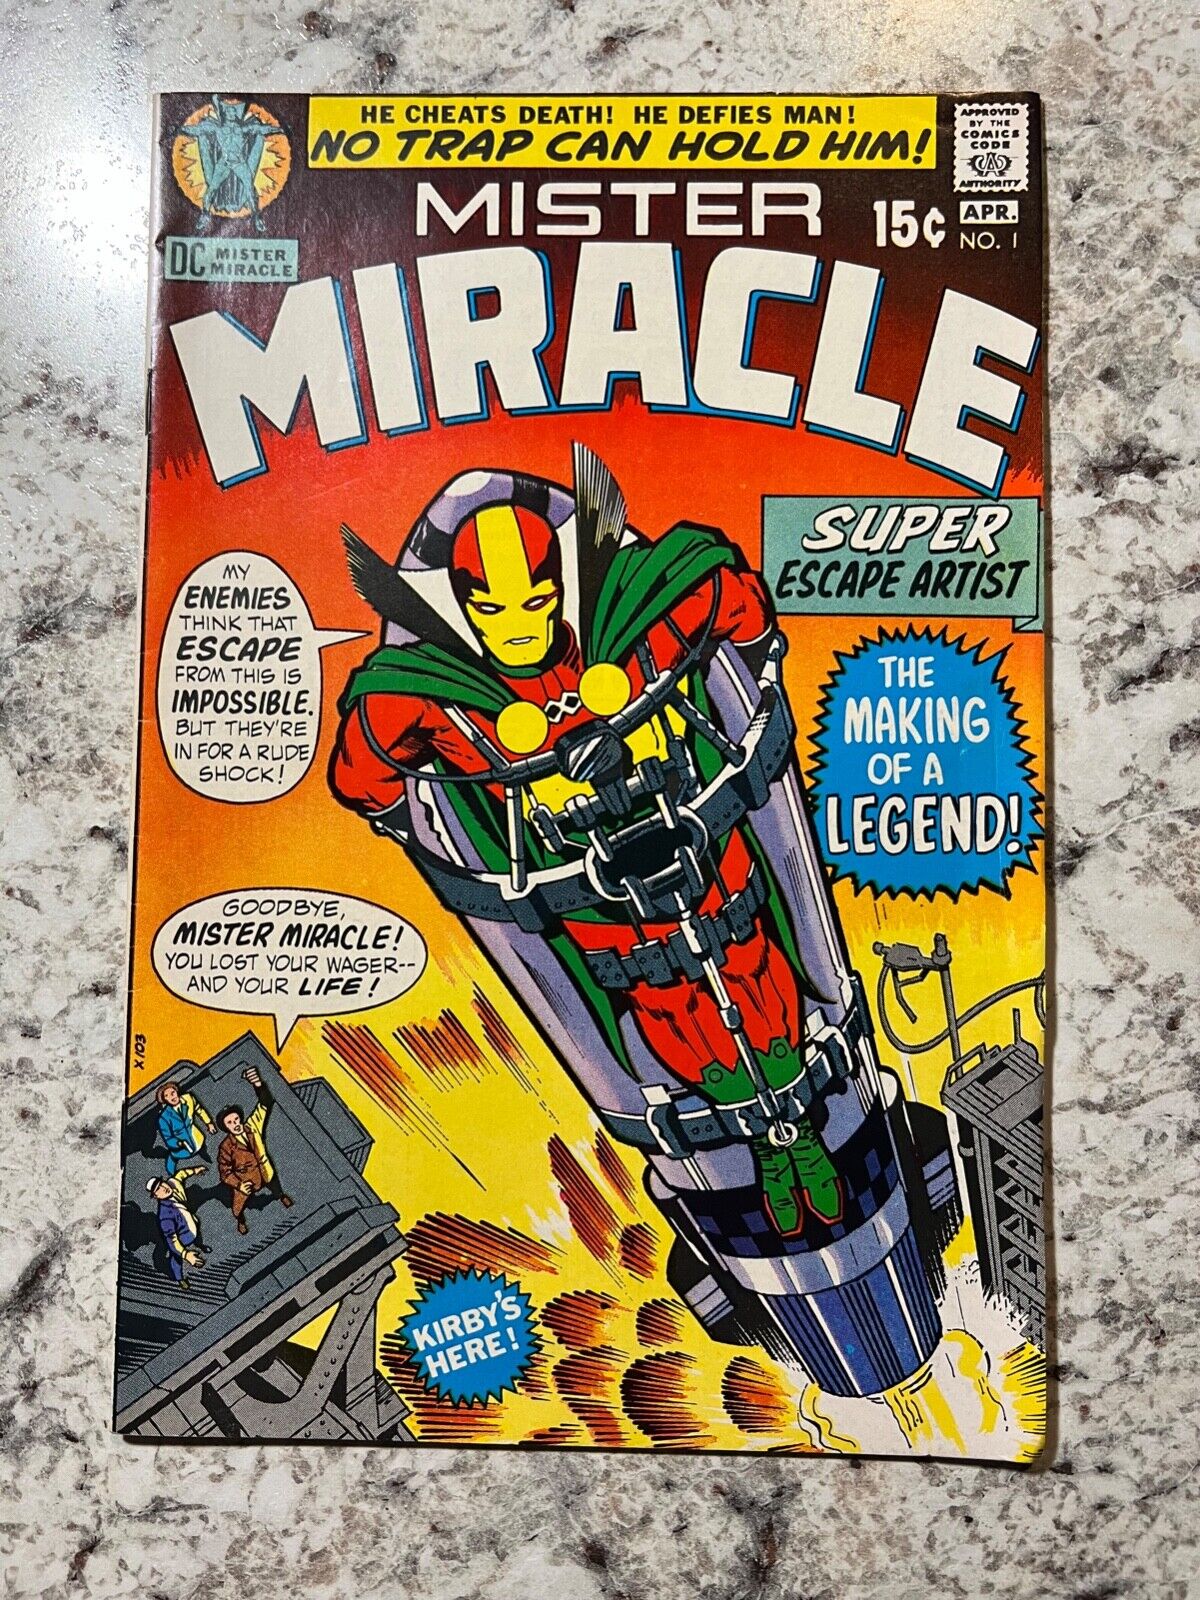 Mister Miracle #1 (DC Comics 1971) 1st Mister Miracle appearance Jack Kirby